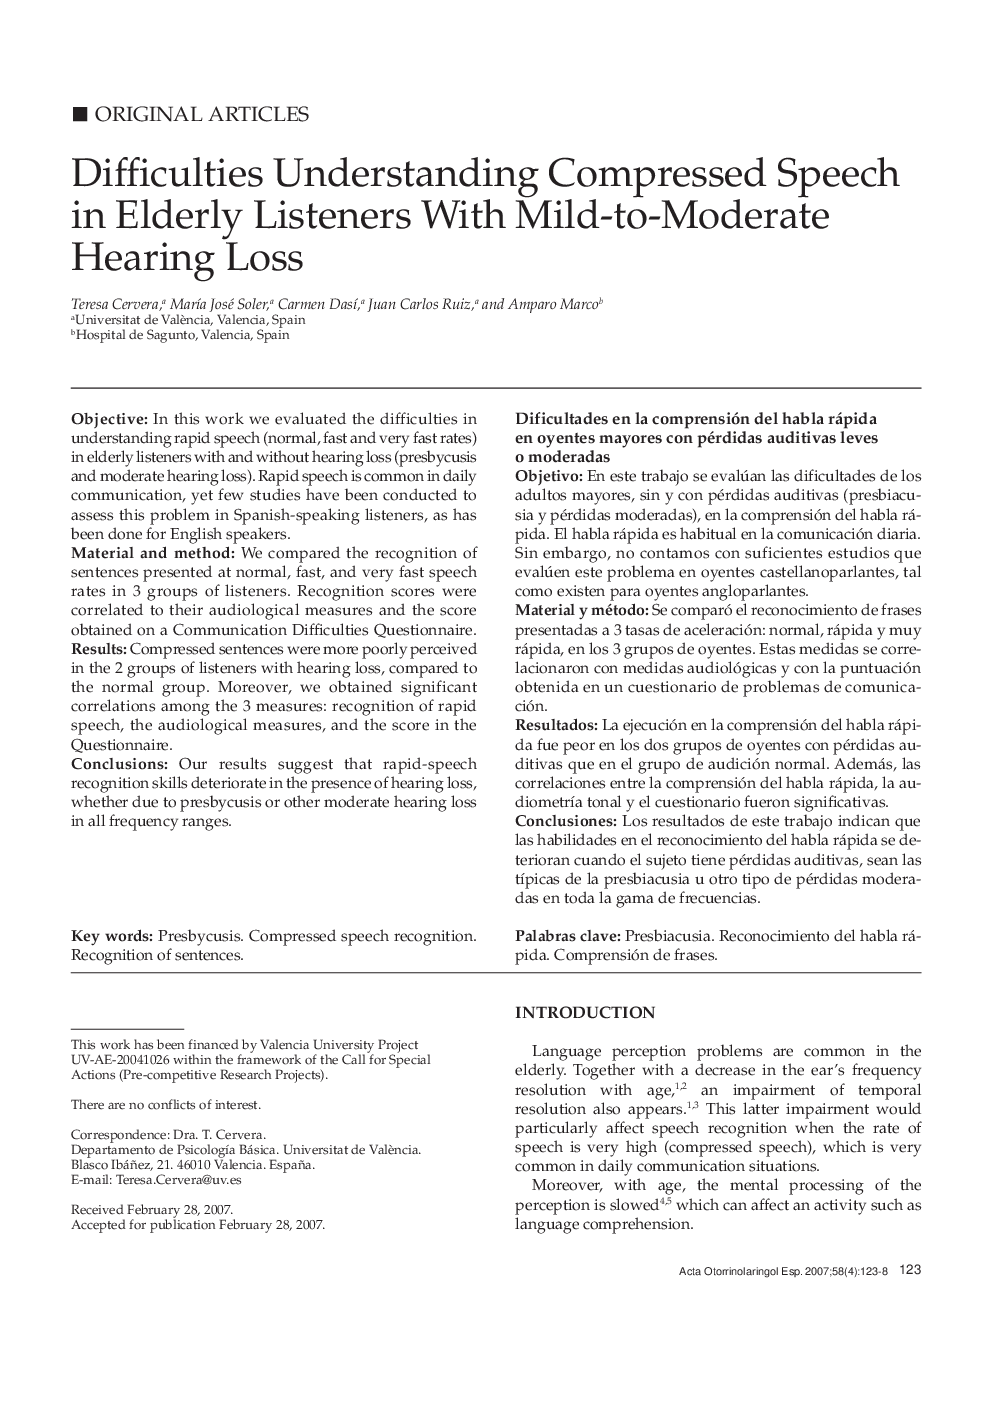 Difficulties Understanding Compressed Speech in Elderly Listeners With Mild-to-Moderate Hearing Loss